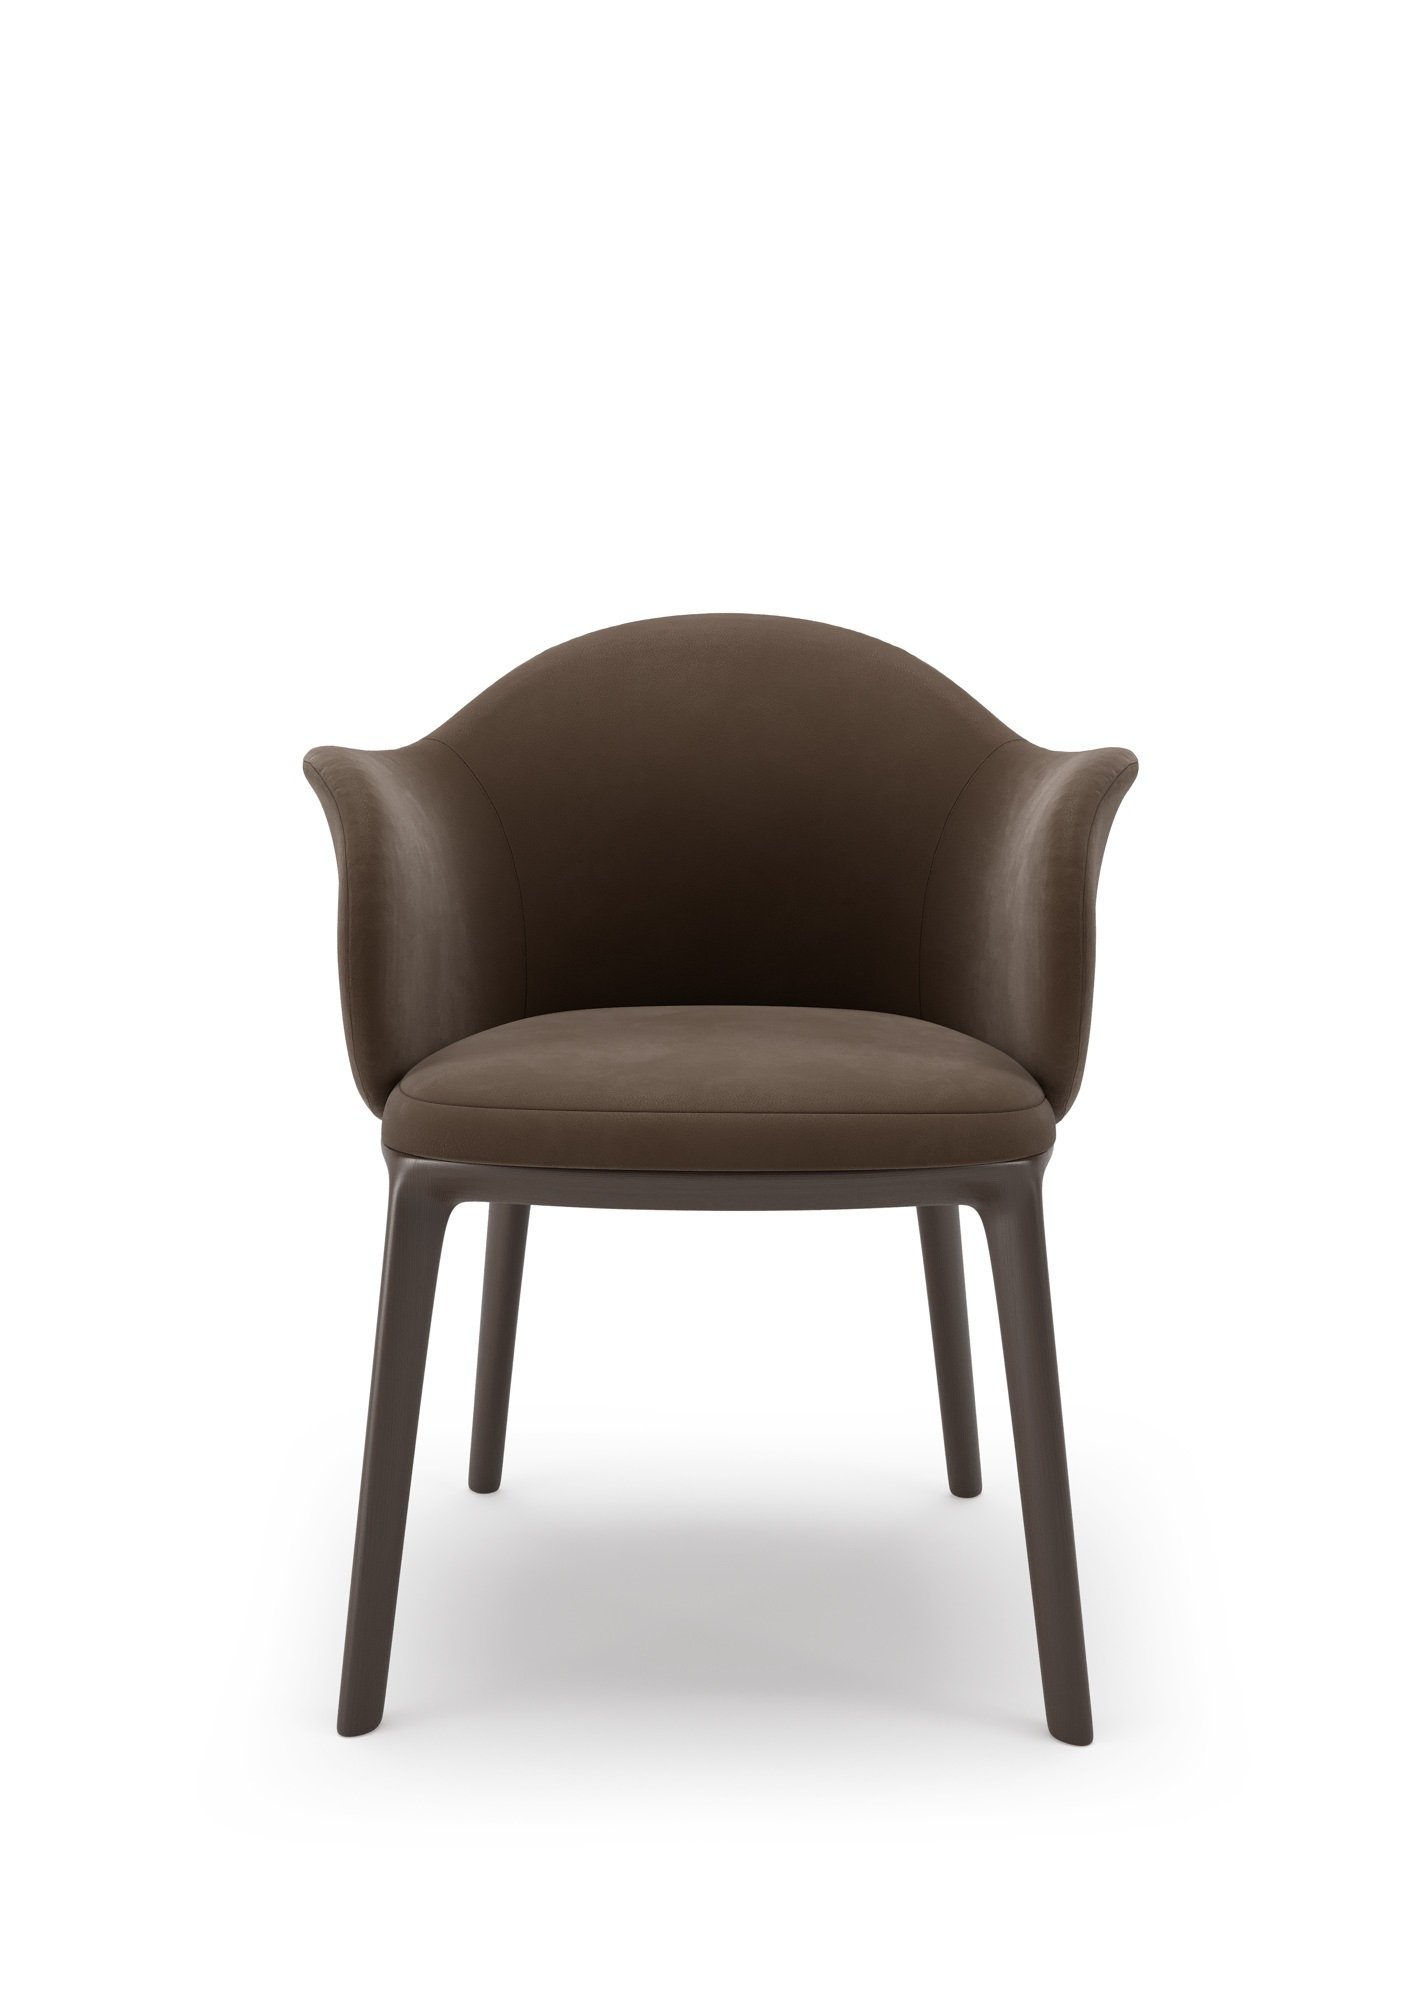 Oscar Chair from Fiam, designed by Patrick Norguet